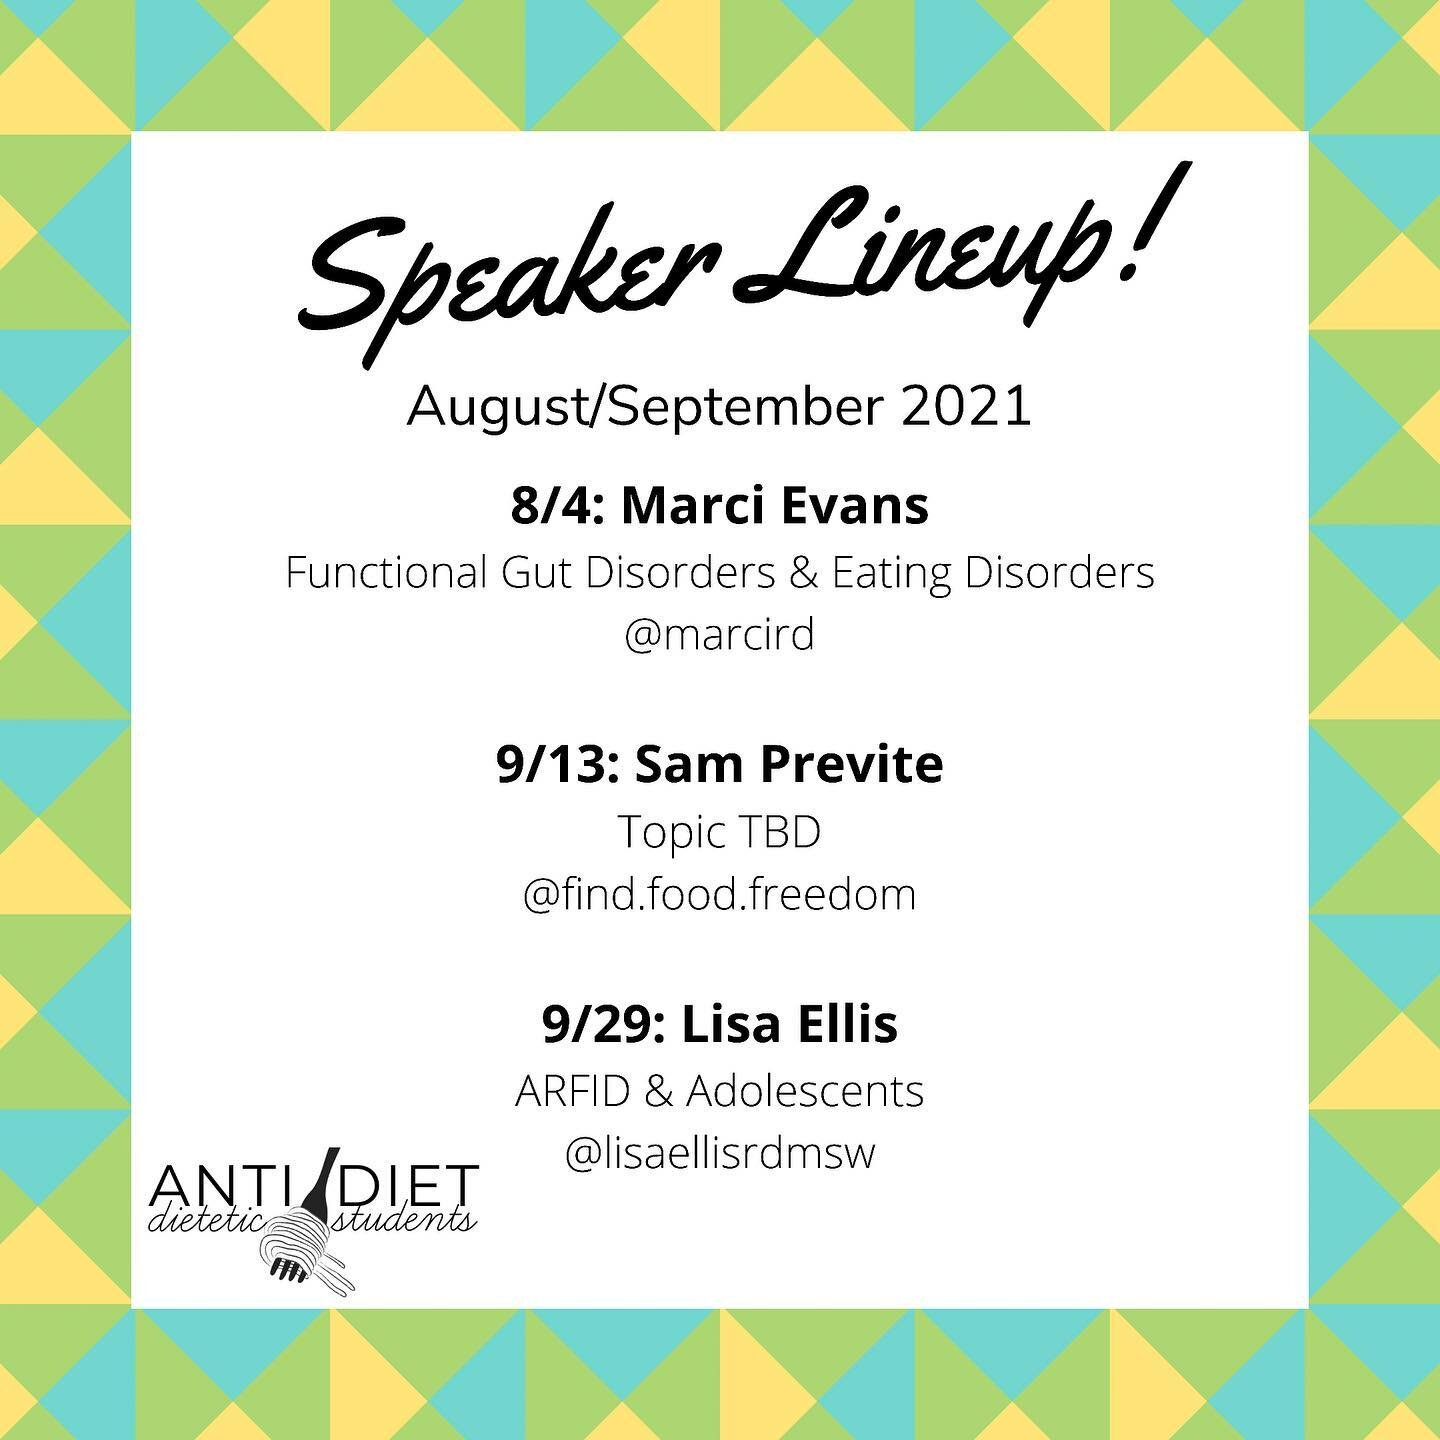 Hi everyone! We are so excited to host these amazing speakers for you in August and September! You can join our meetings by clicking the link in our bio and filling out the form.
&bull;
Check out the speakers here:
@marcird
@find.food.freedom
@lisael